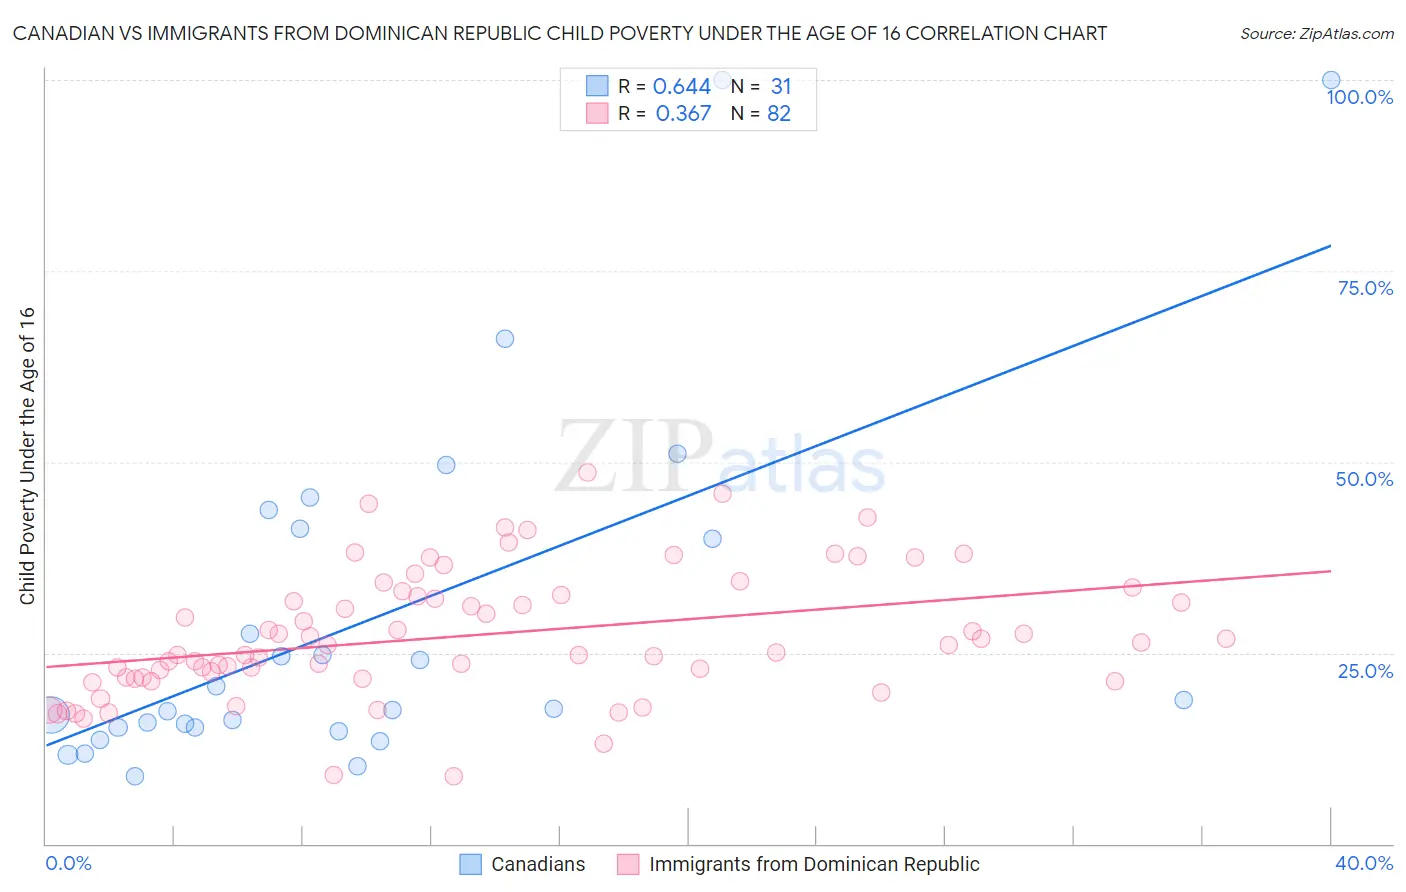 Canadian vs Immigrants from Dominican Republic Child Poverty Under the Age of 16